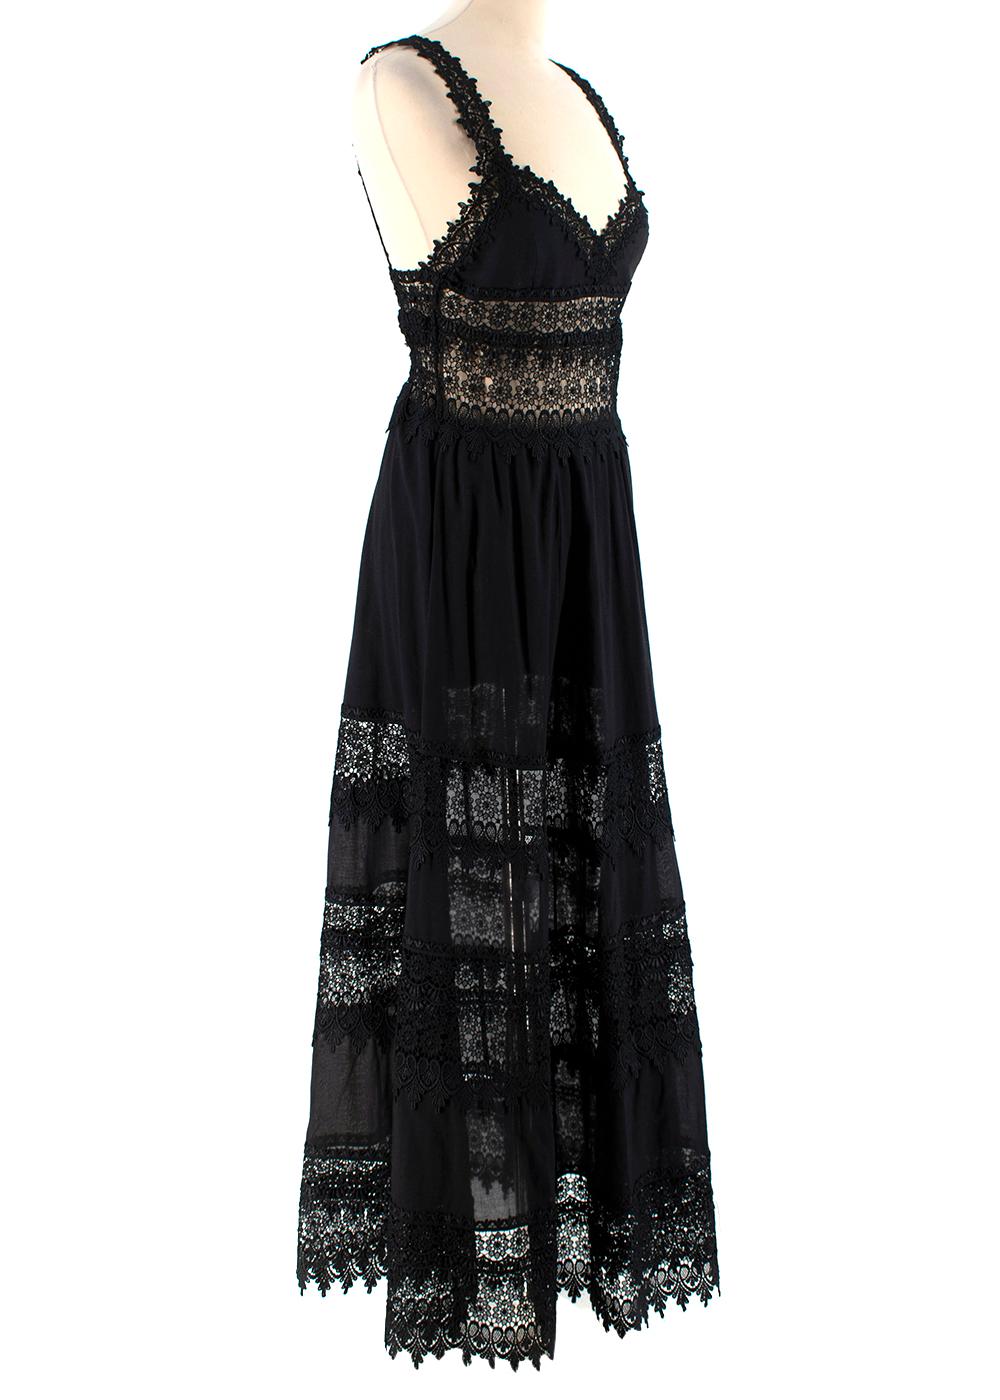 Charo Ruiz Sophia lace-trim maxi dress.

- Crafted from a black cotton blend
- Lace trim
- A line
- V-neck
- Spaghetti straps
- Ankle-length

Washing instructions:
Hand Wash

PLEASE NOTE, THESE ITEMS ARE PRE-OWNED AND MAY SHOW SIGNS OF BEING STORED